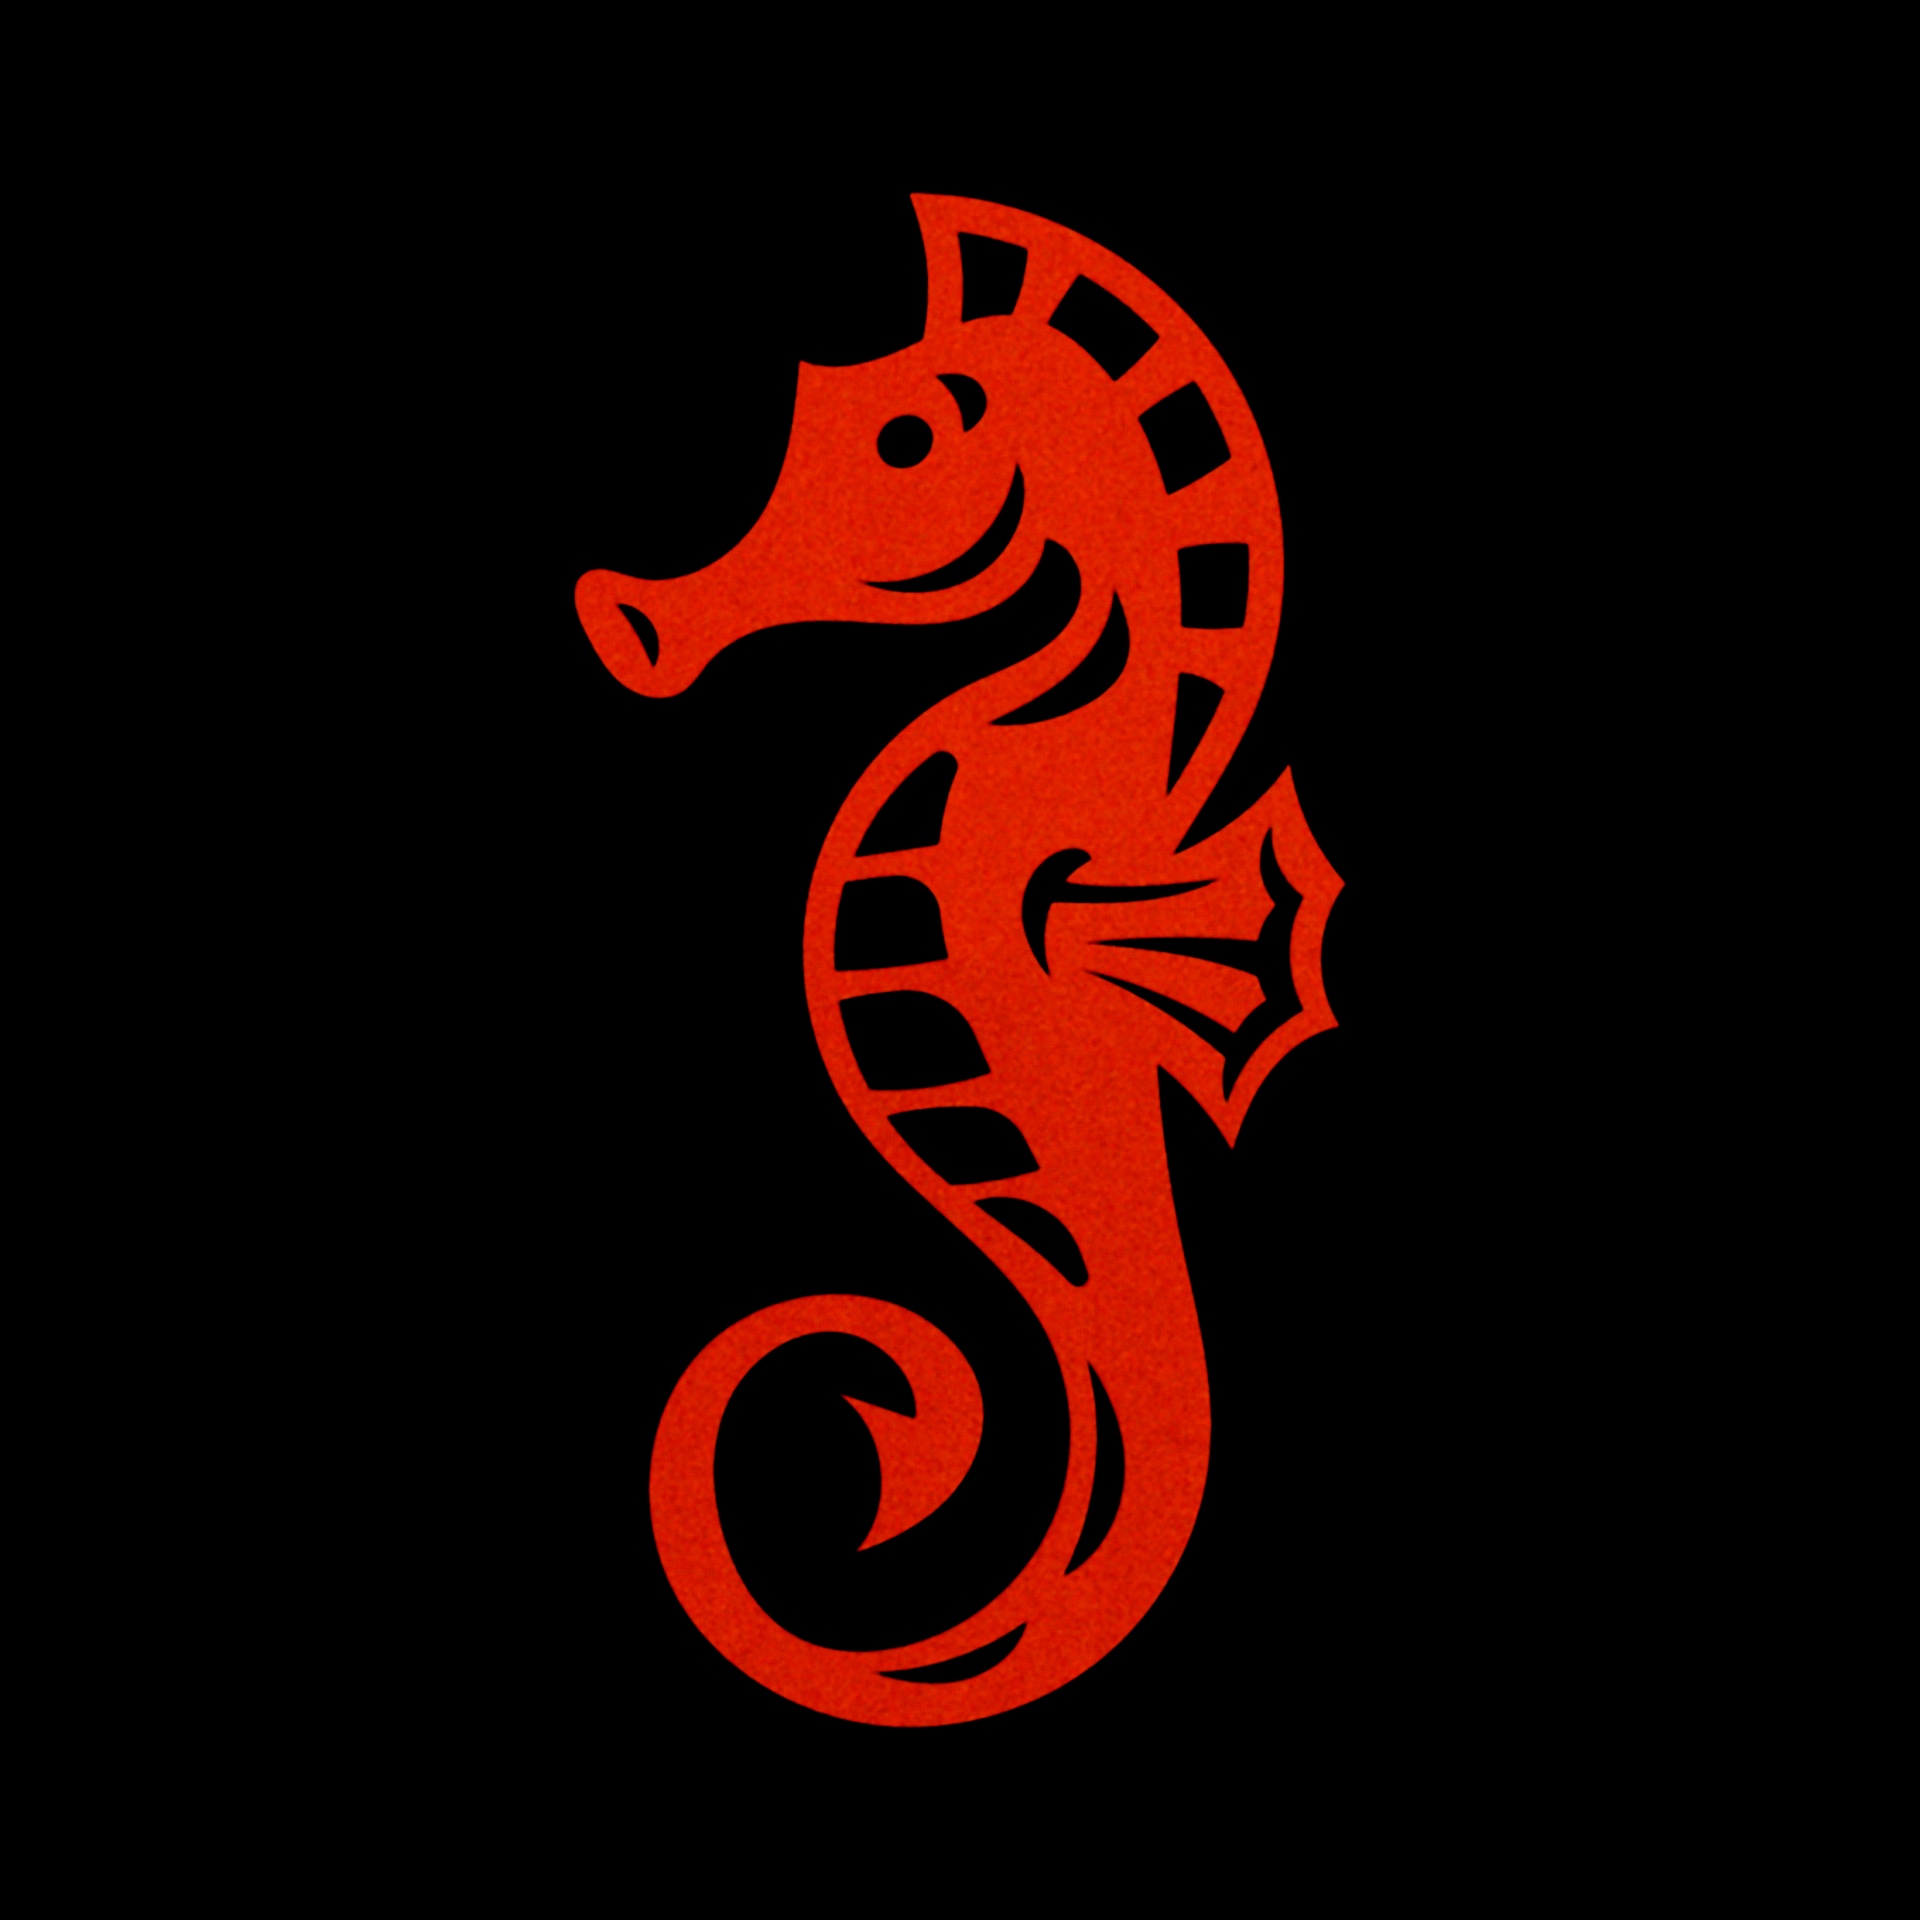 Drawing of a red seahorse on a black background